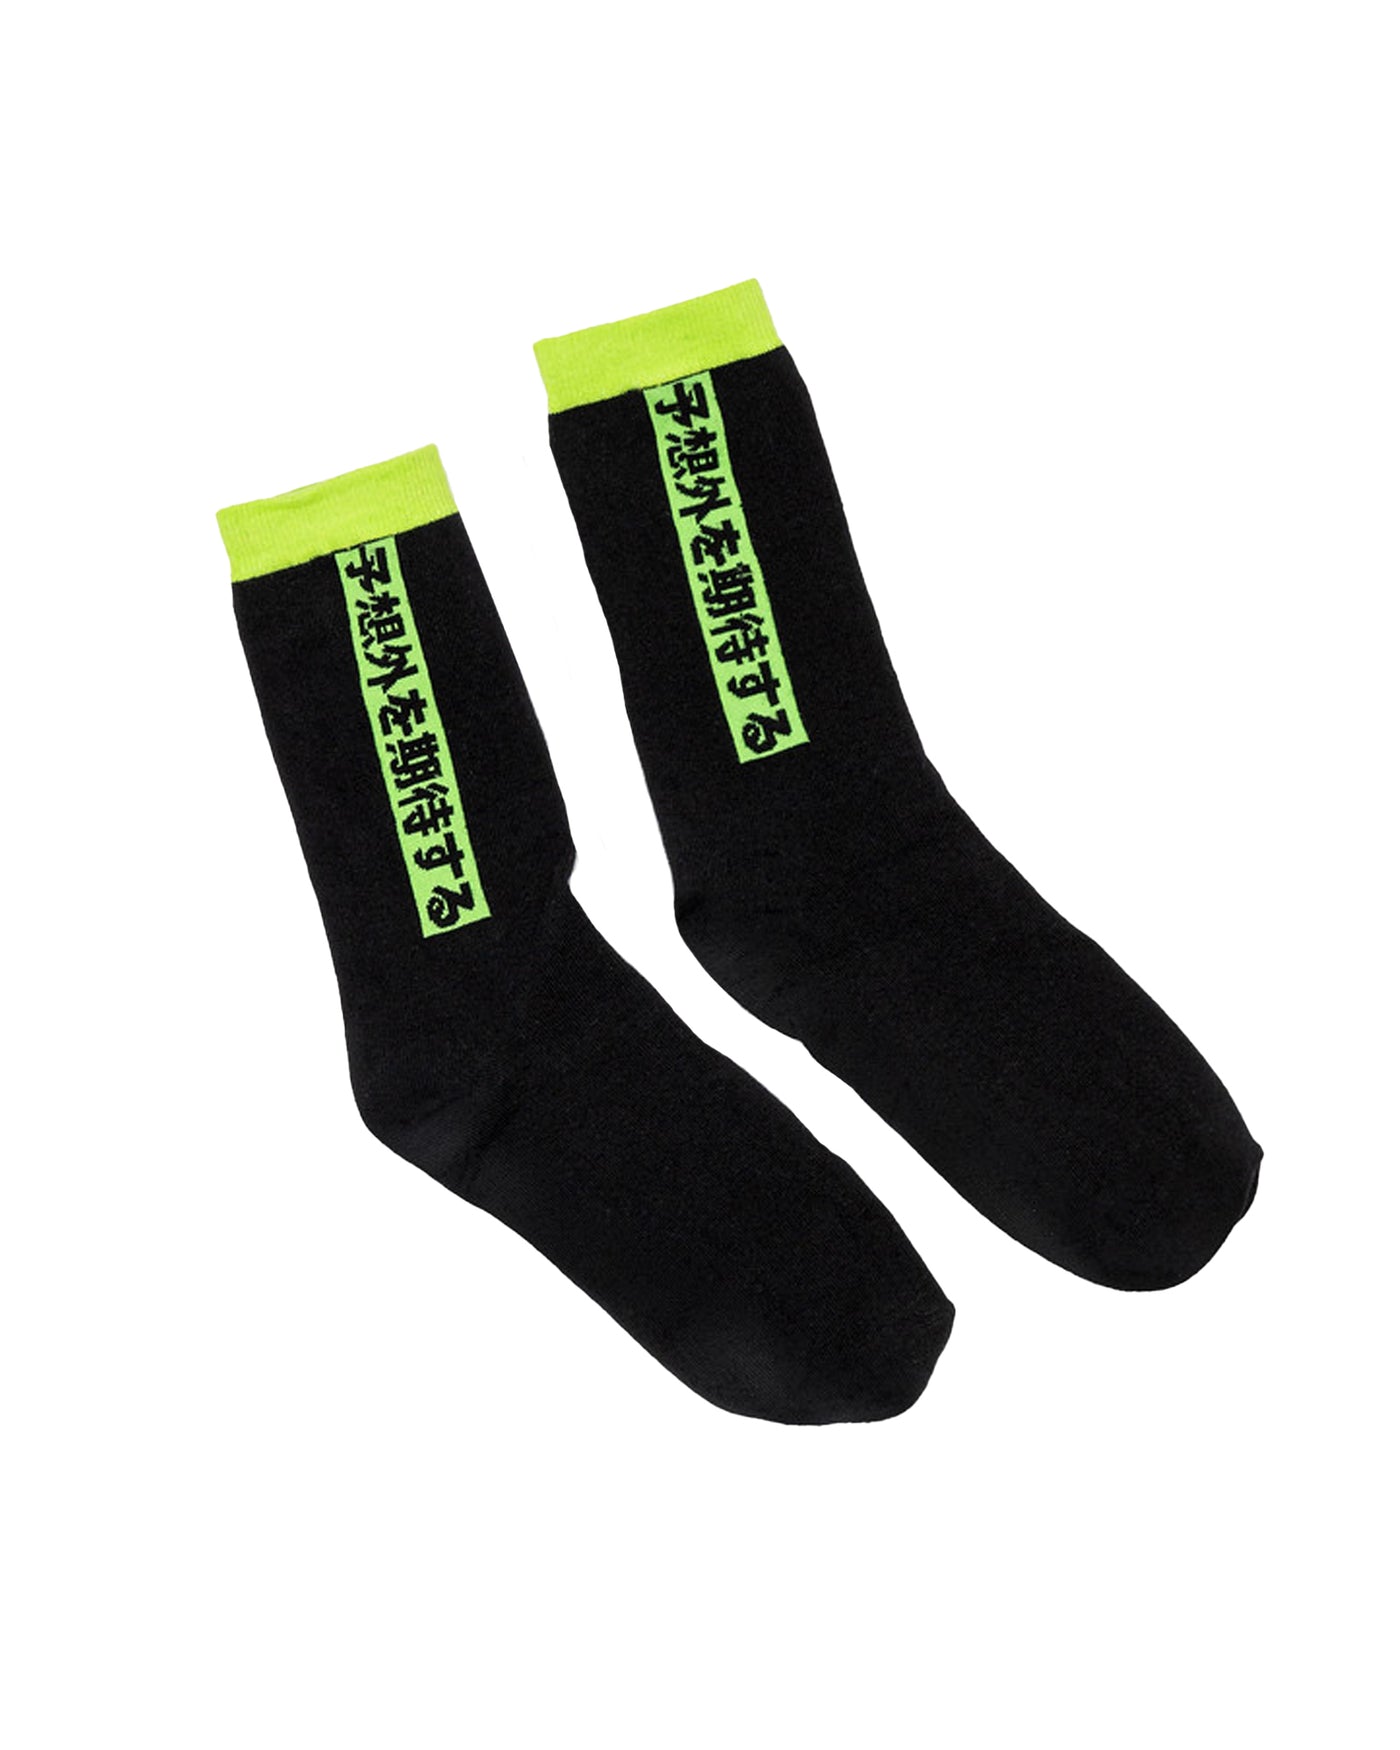 A pair of black socks with neon inlays and the Ninjas in Pyjamas logo from NIP merch collection. These comfortable and stylish socks are designed to represent your passion for NIP while adding a touch of ninja-inspired flair to your everyday outfit.